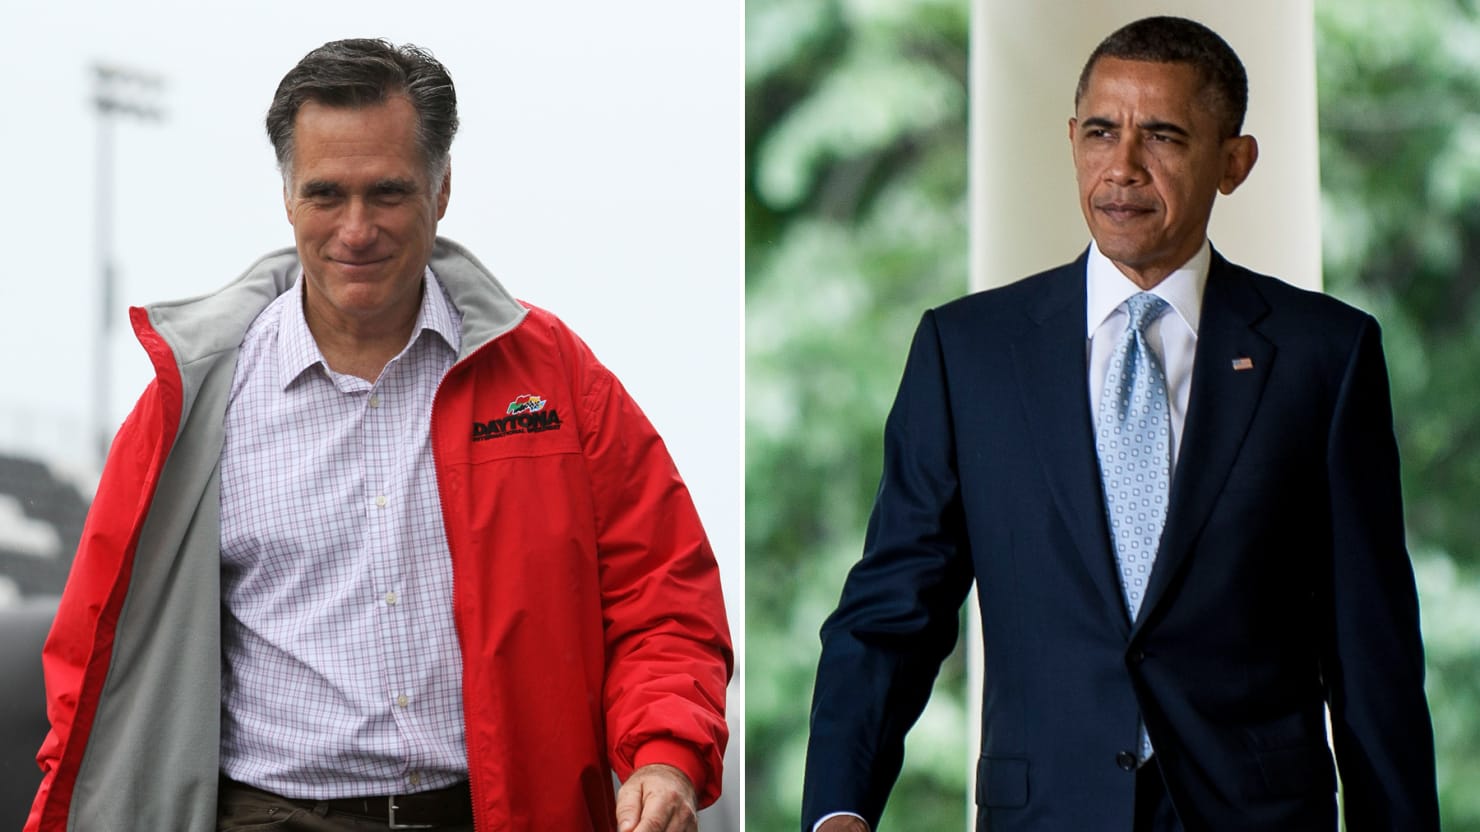 Poll: Dead Heat for Obama, Romney